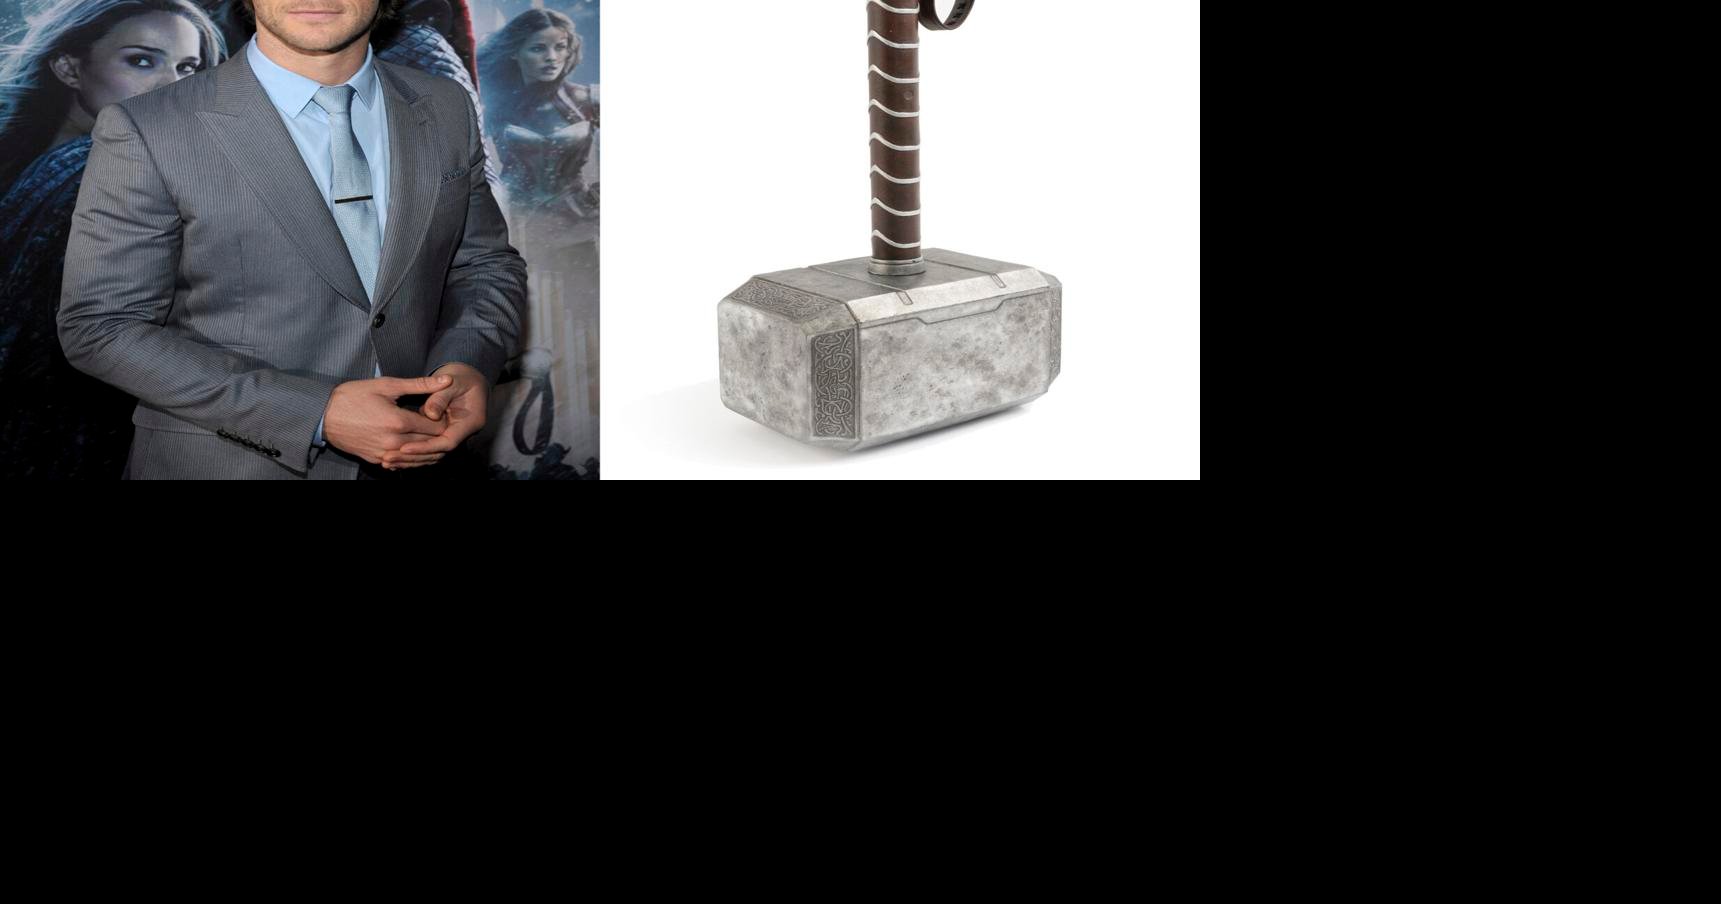 Chris Hemsworth's 'Thor' Hammer Going Up For Sale in Movie